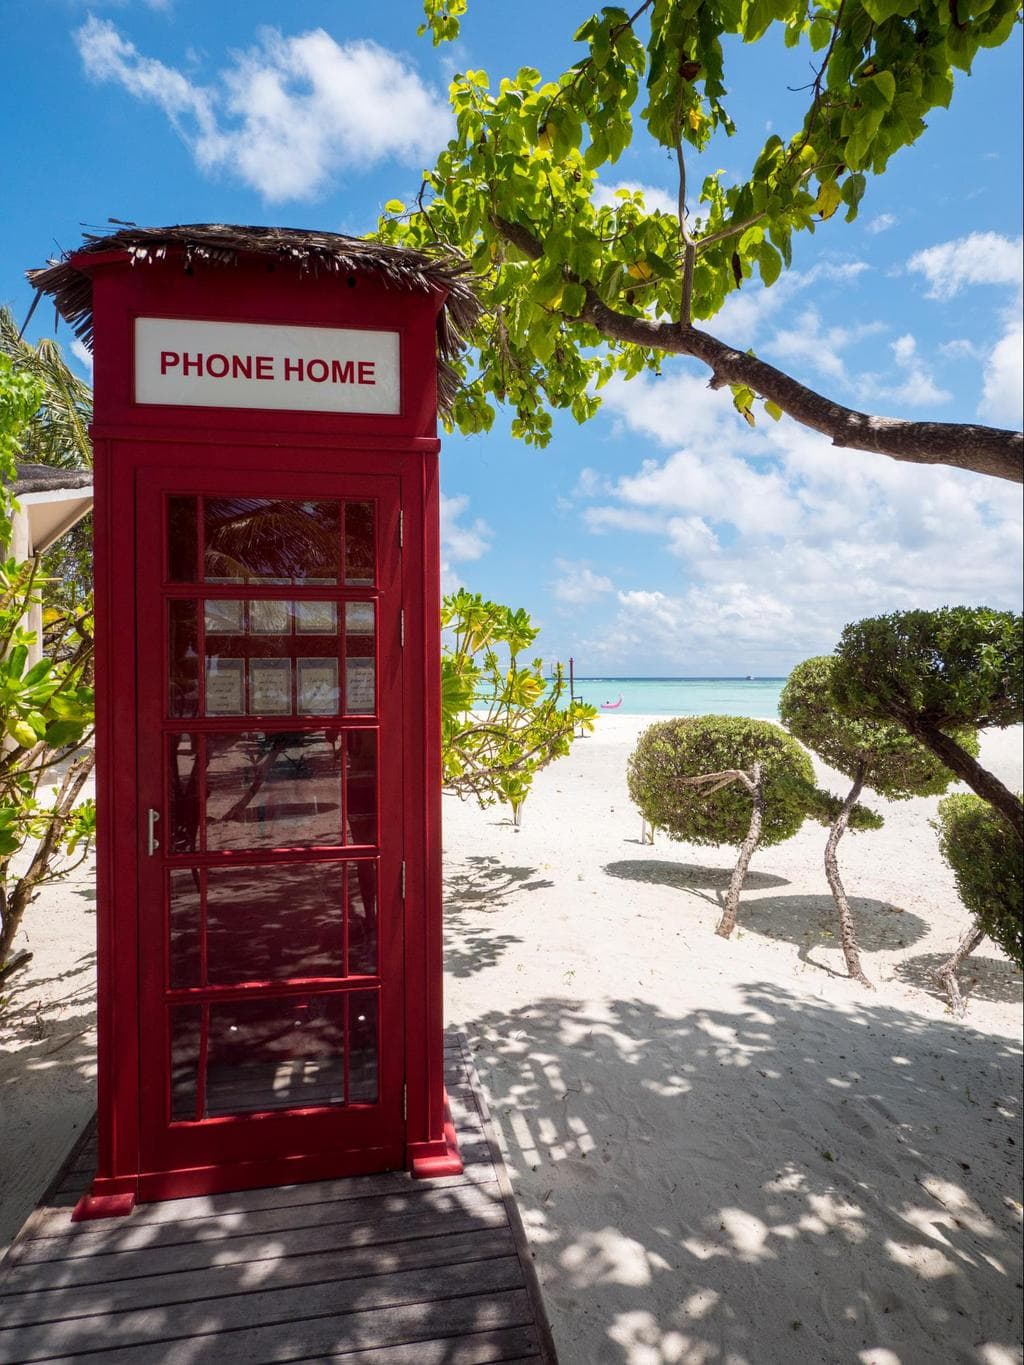 Phone booth to call home at LUX*